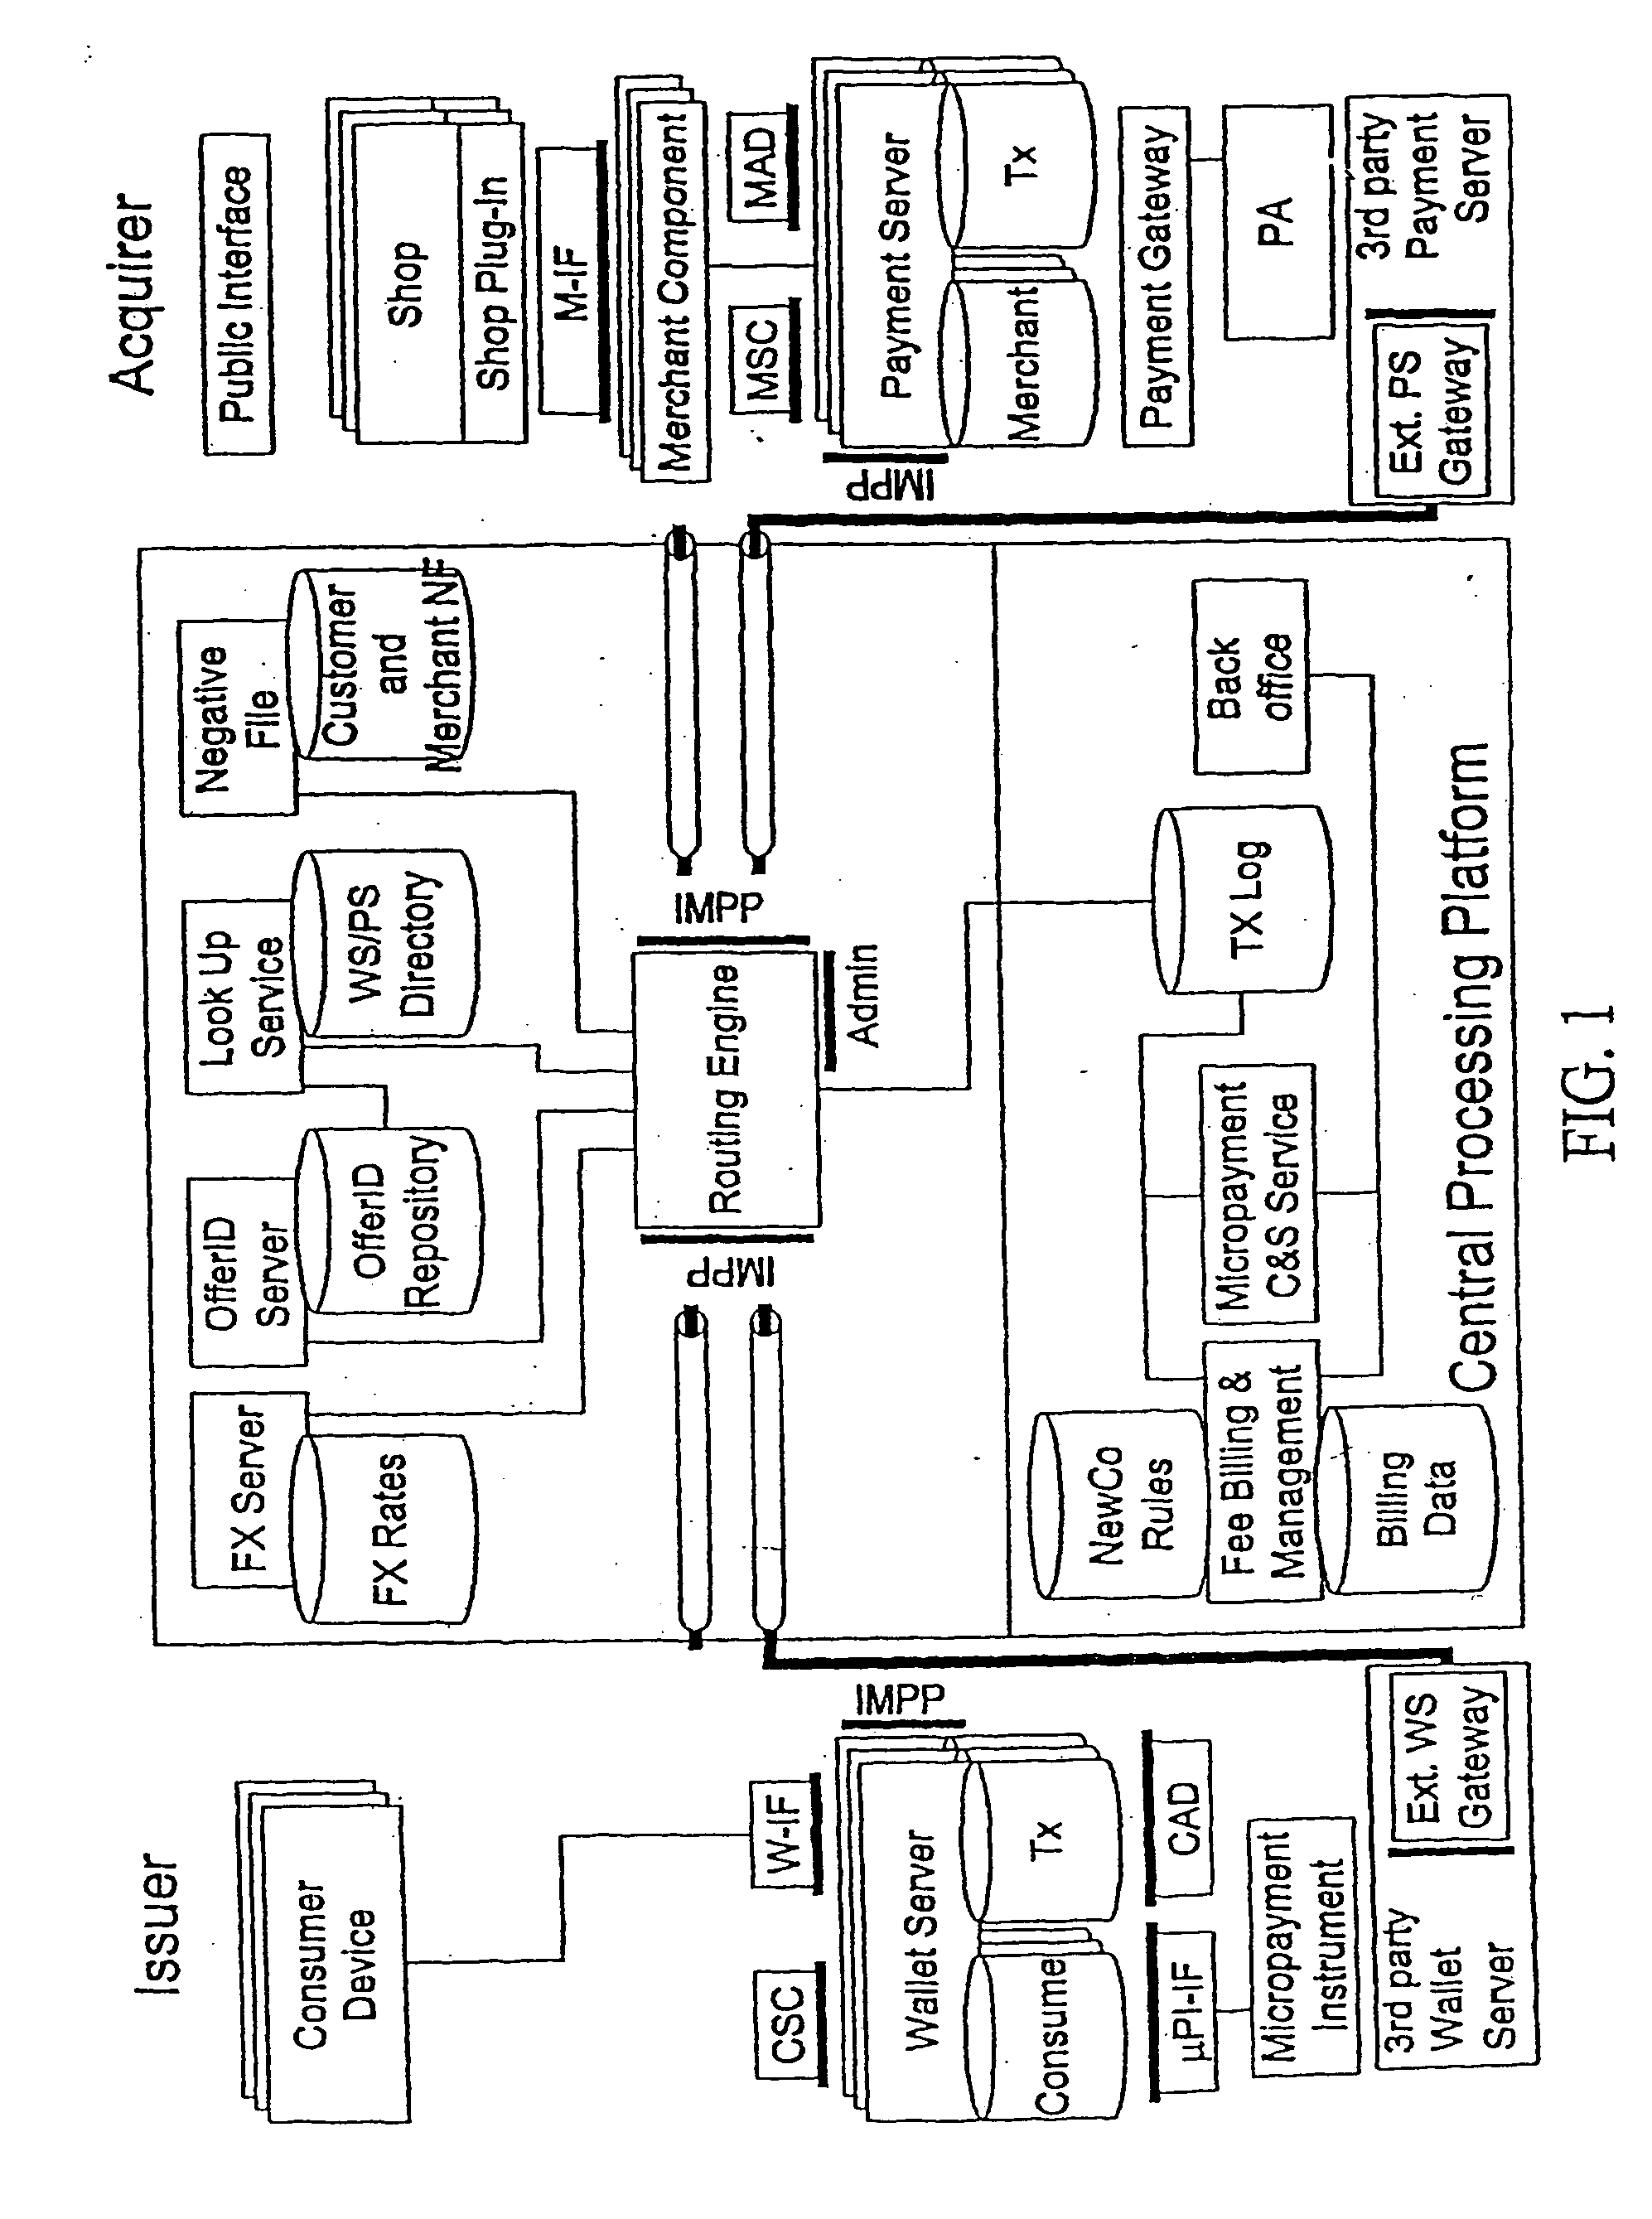 Payment protocol and data transmission method and data transmission device for conducting payment transactions